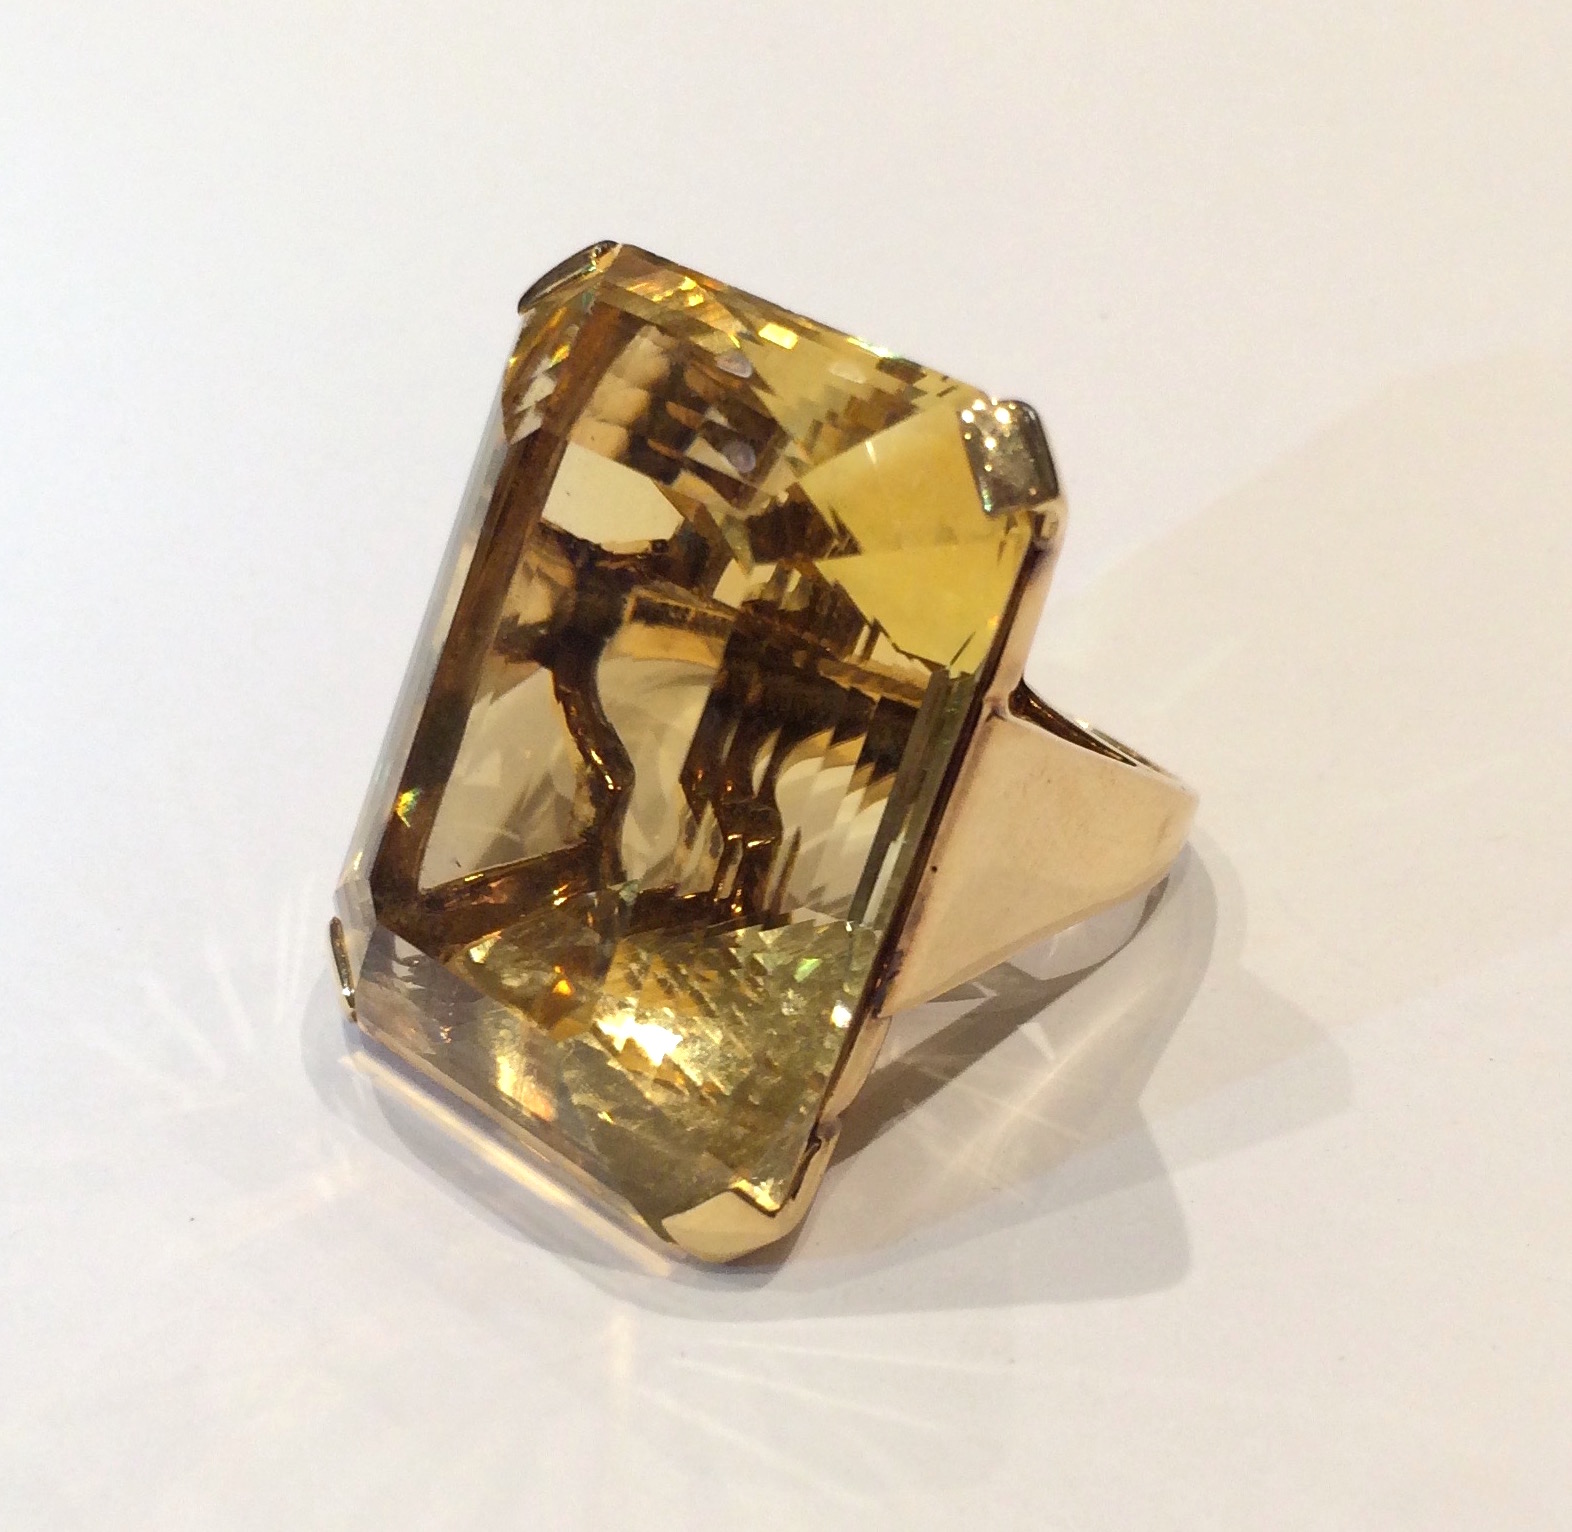 Seaman Schepps ring, large stepped cut citrine (approx. 125 carats) set in 14K yellow gold, signed, c. 1940’s